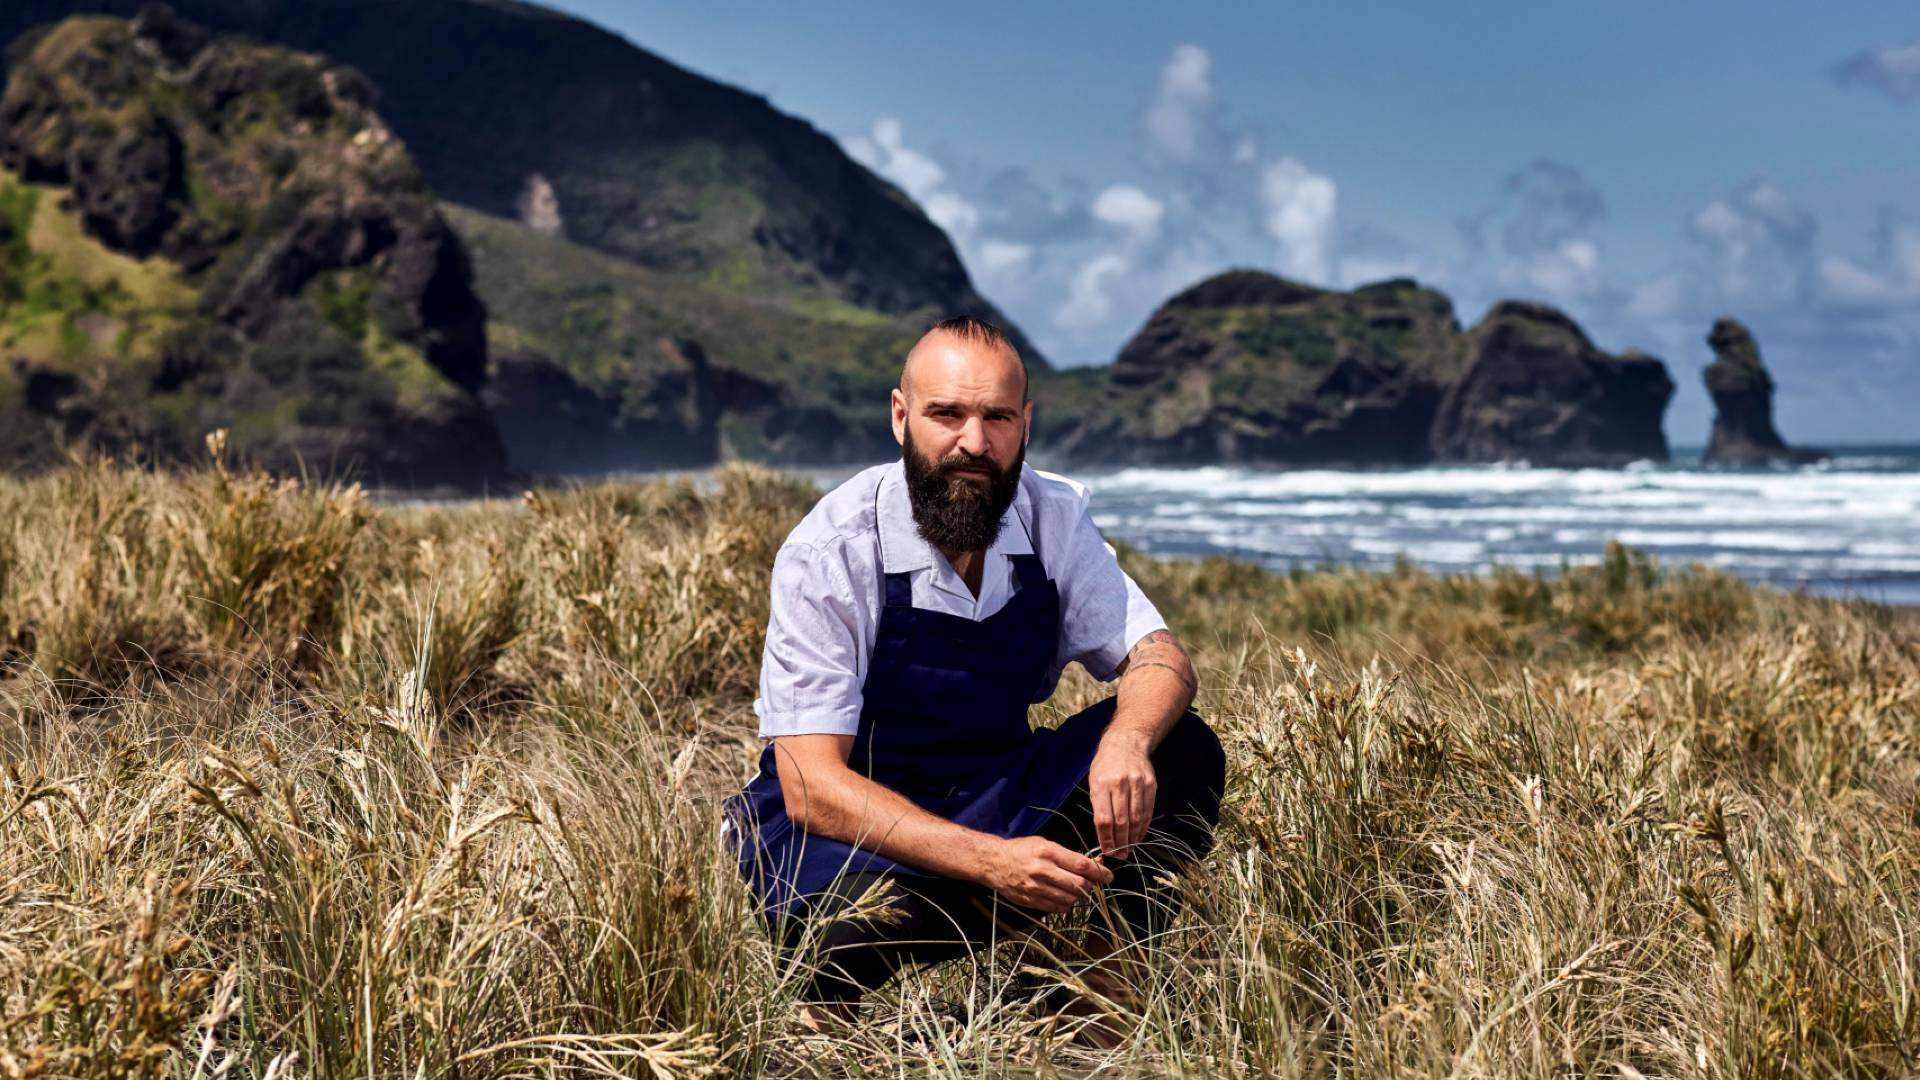 Coming Soon: Aryeh Is Piha's New 89-Seater Beachside Eatery From Chef Lucas Parkinson